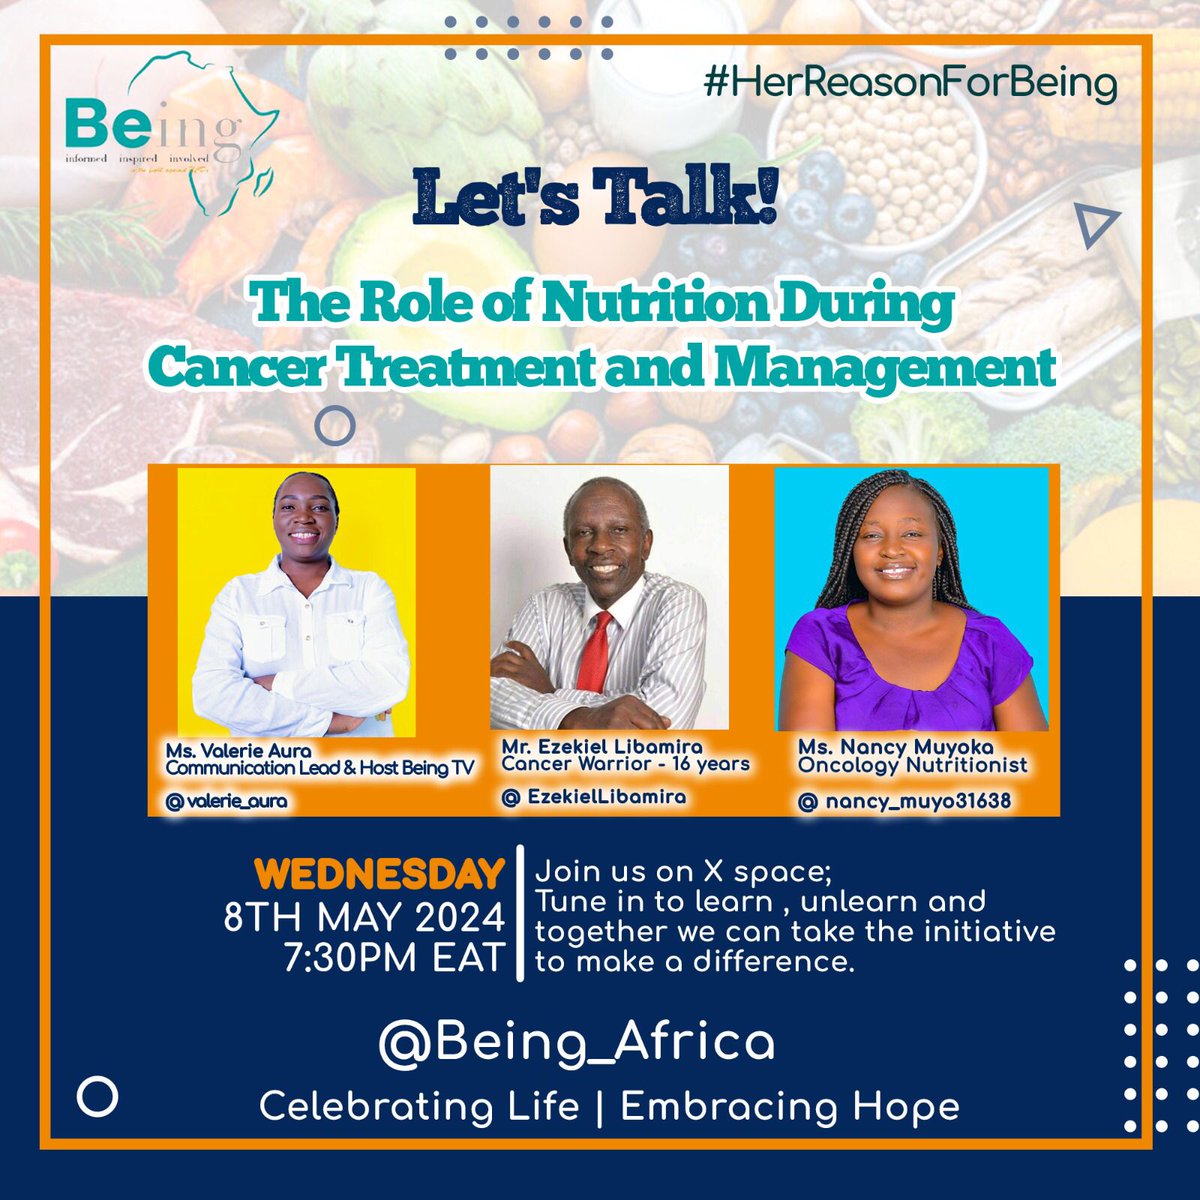 When: Wednesday 8th May 2024
What: #HerReasonForBeing Day
Where: @XSpaces 
Time: 7:30 pm EAT
Topic: The Role of Nutrition During Treatment & Management.

twitter.com/i/spaces/1Mnxn……

Speakers: @nancy_muyo31638 @EzekielLibamira

Tune in, learn, and unlearn.
@IGCSociety @kenconetwork